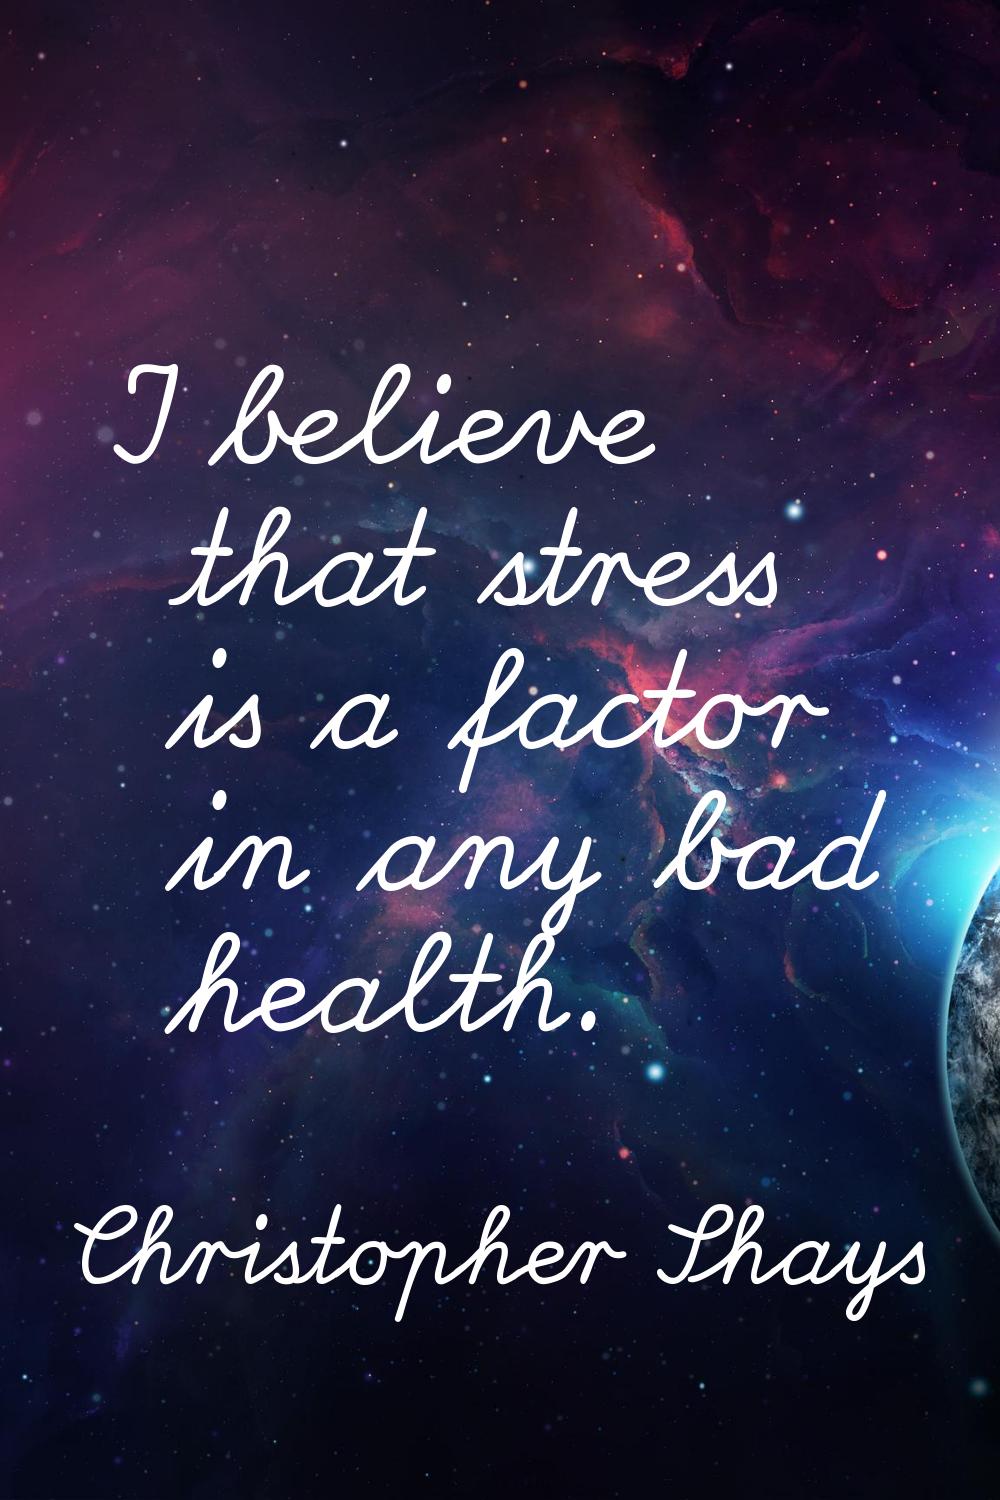 I believe that stress is a factor in any bad health.